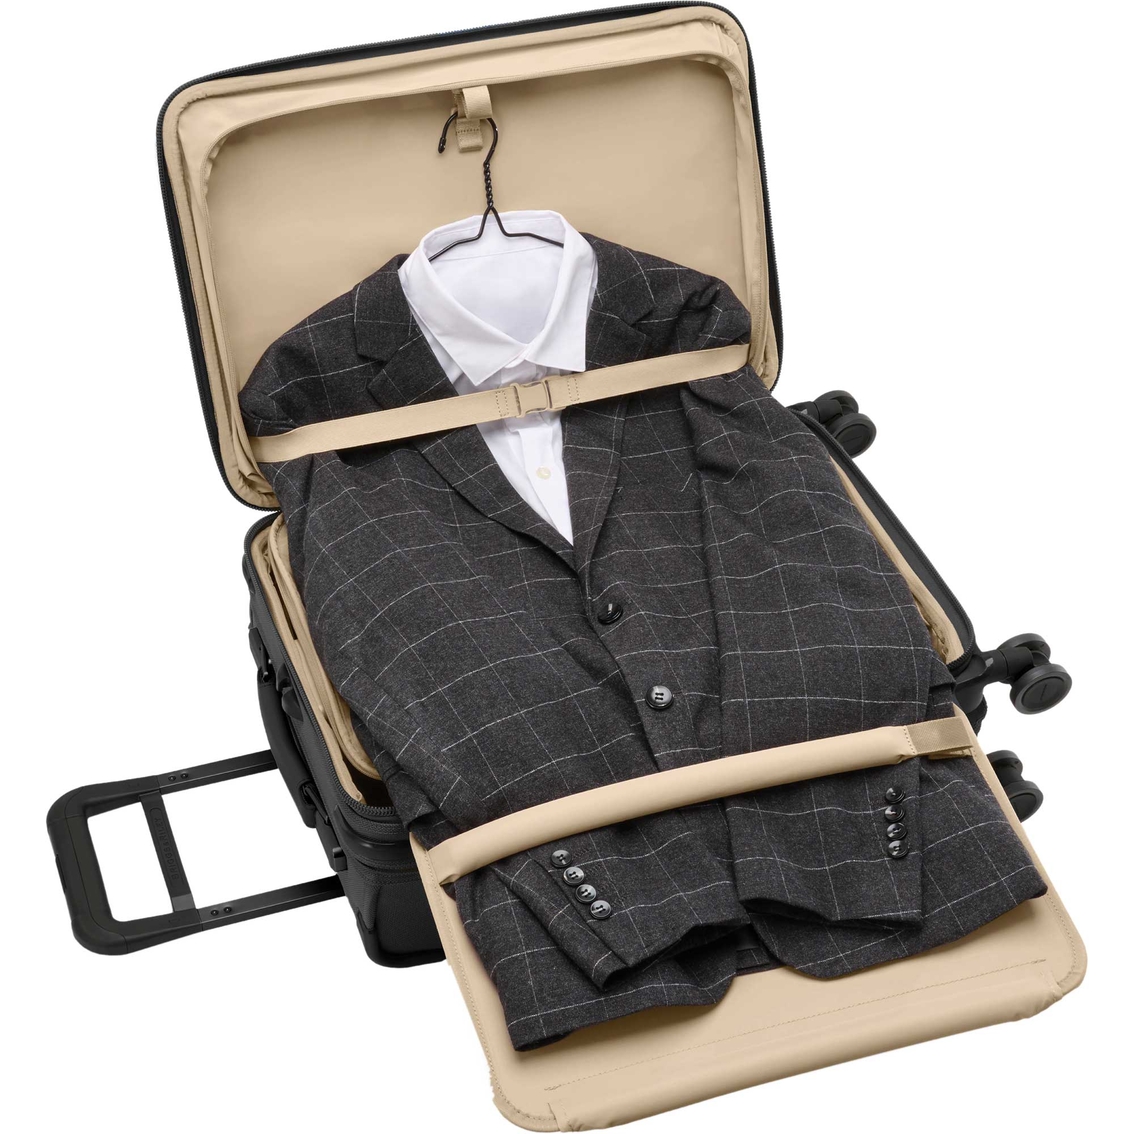 Briggs & Riley Baseline Essential Carry On Spinner - Image 9 of 10